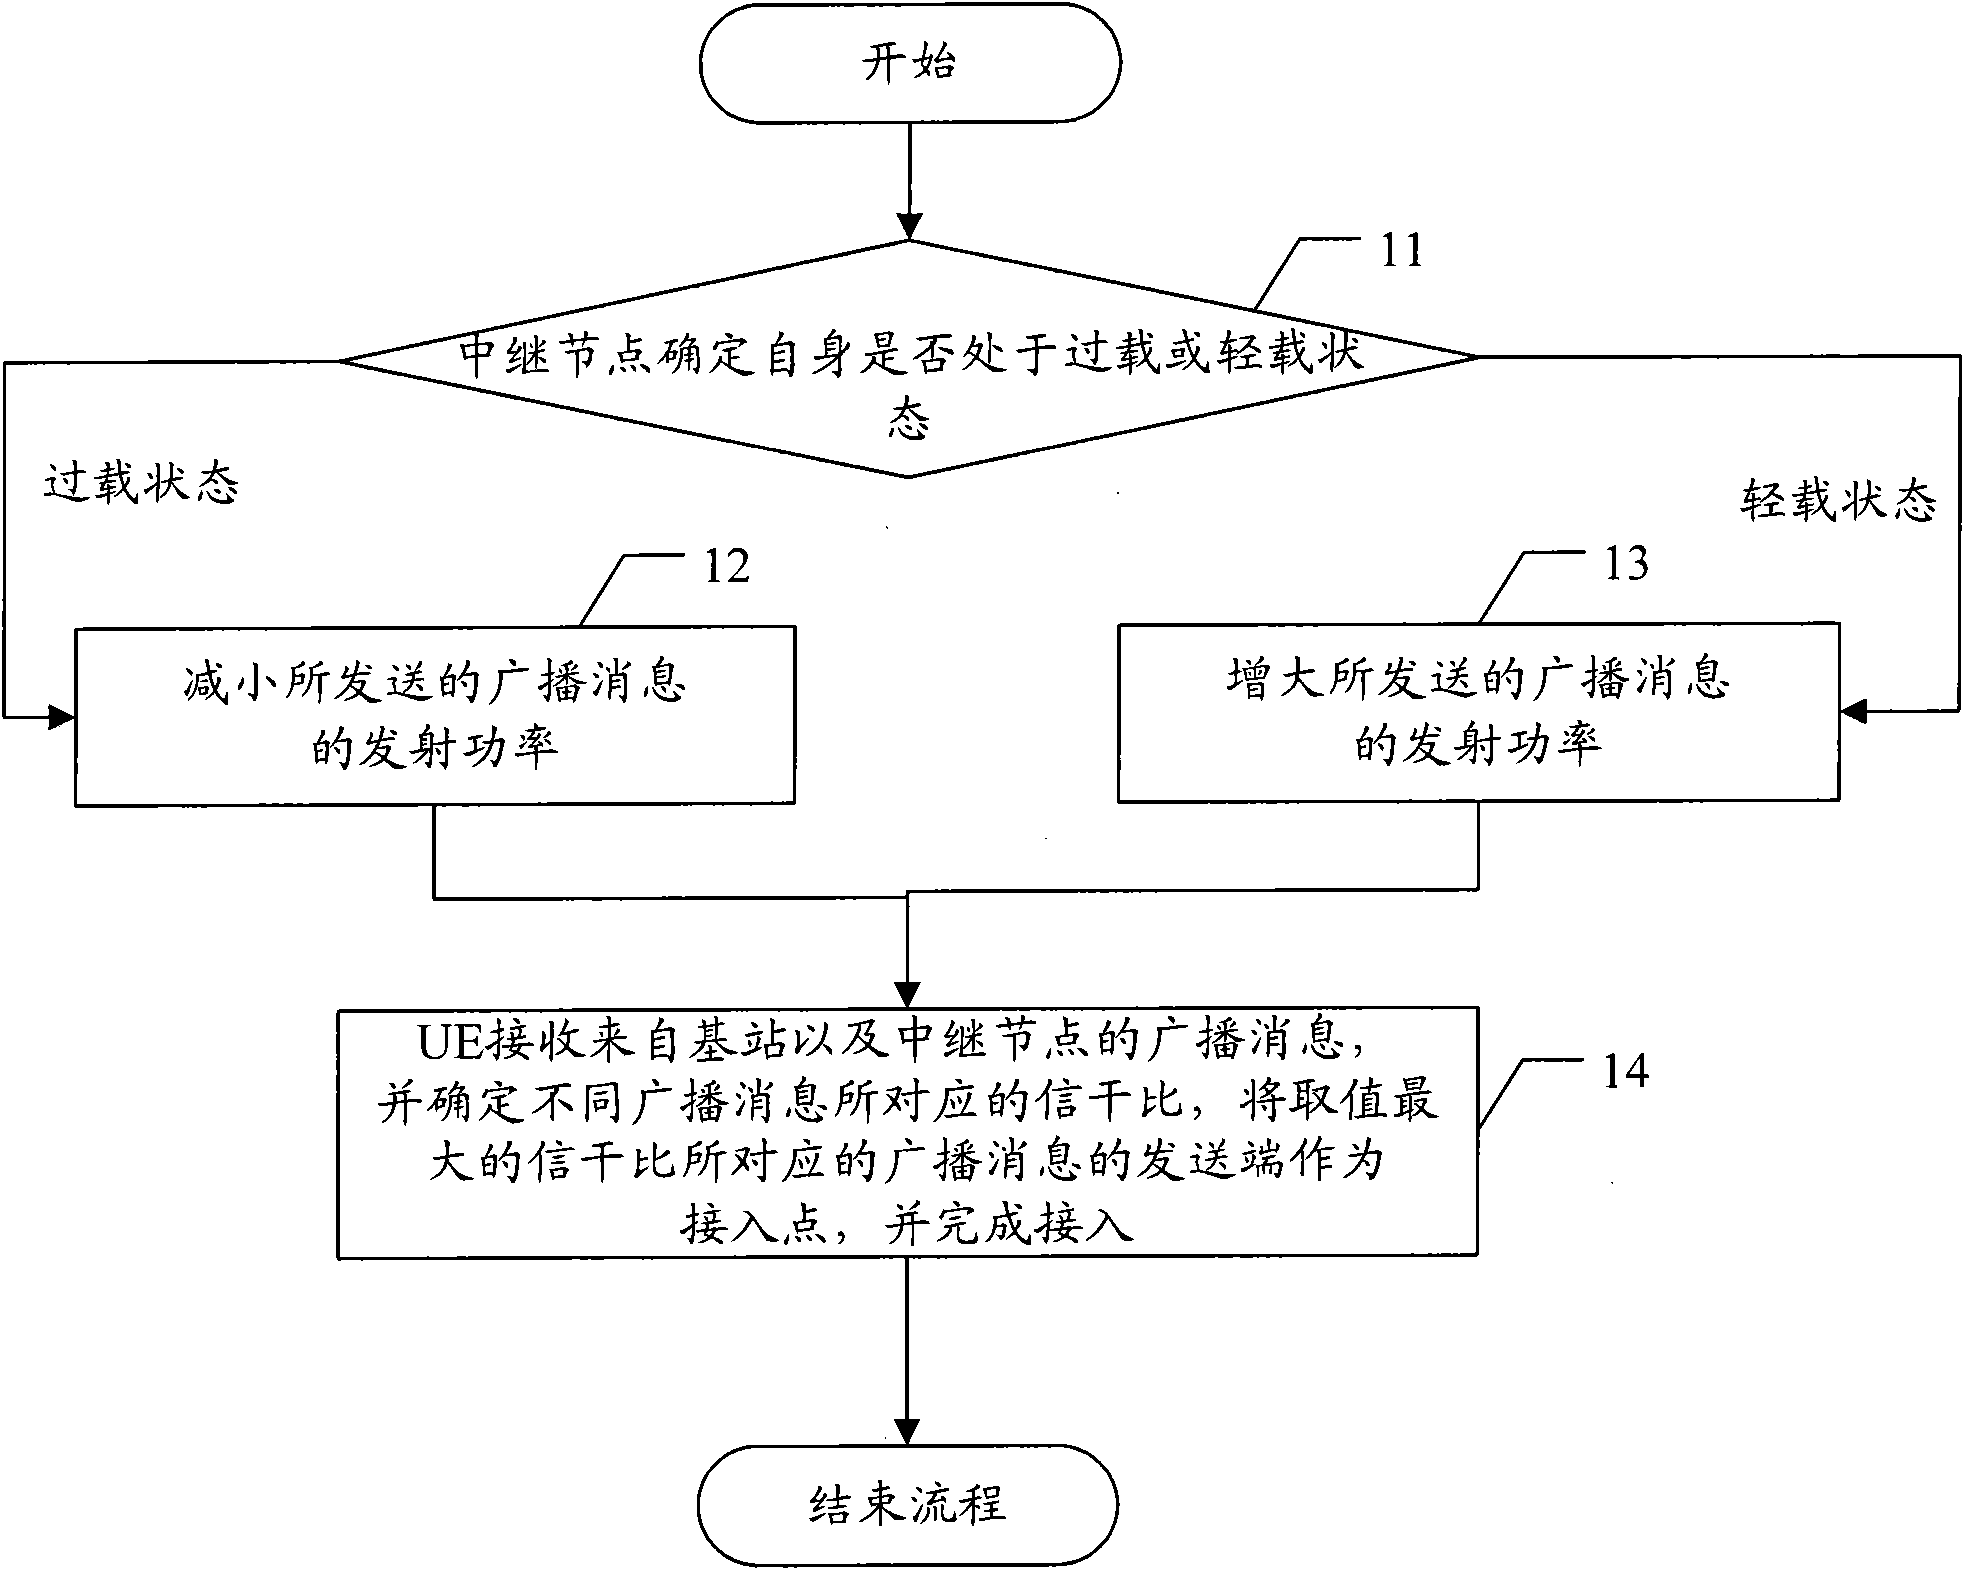 Consumer terminal access method, system and device in high level long-term evolutionary progression system